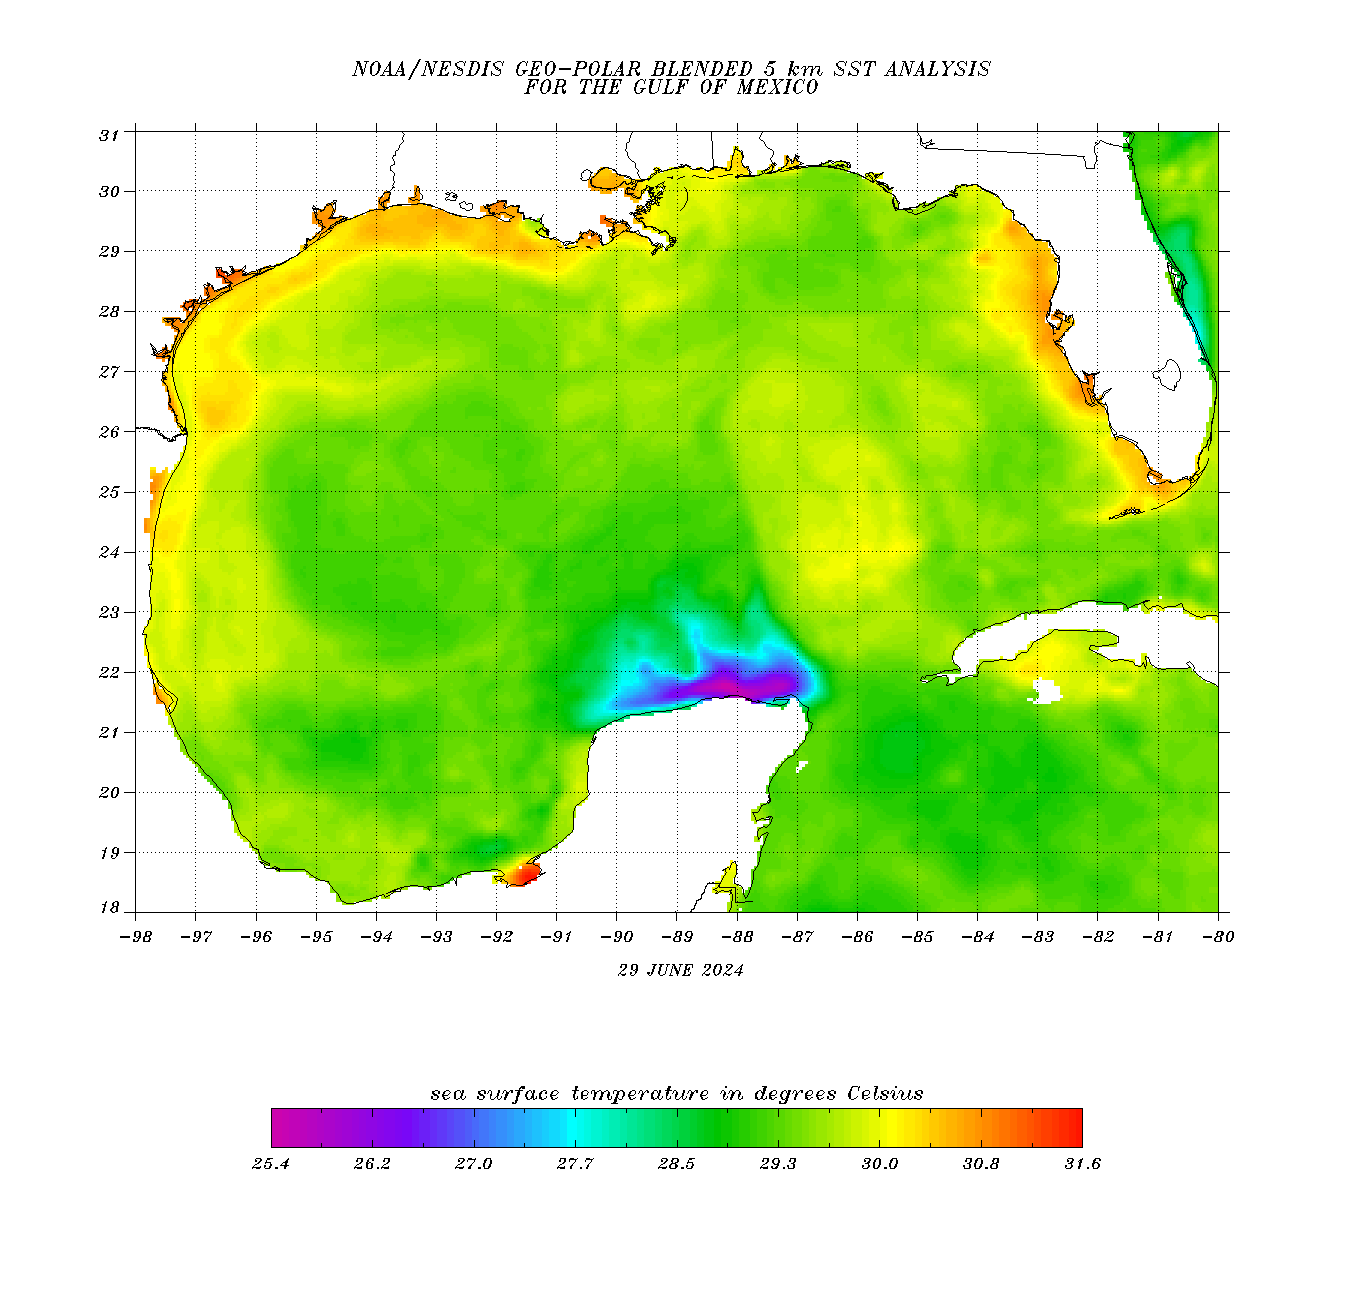 Current Gulf Of Mexico Water Temperature Map Lau3O5Sfnxcdzm